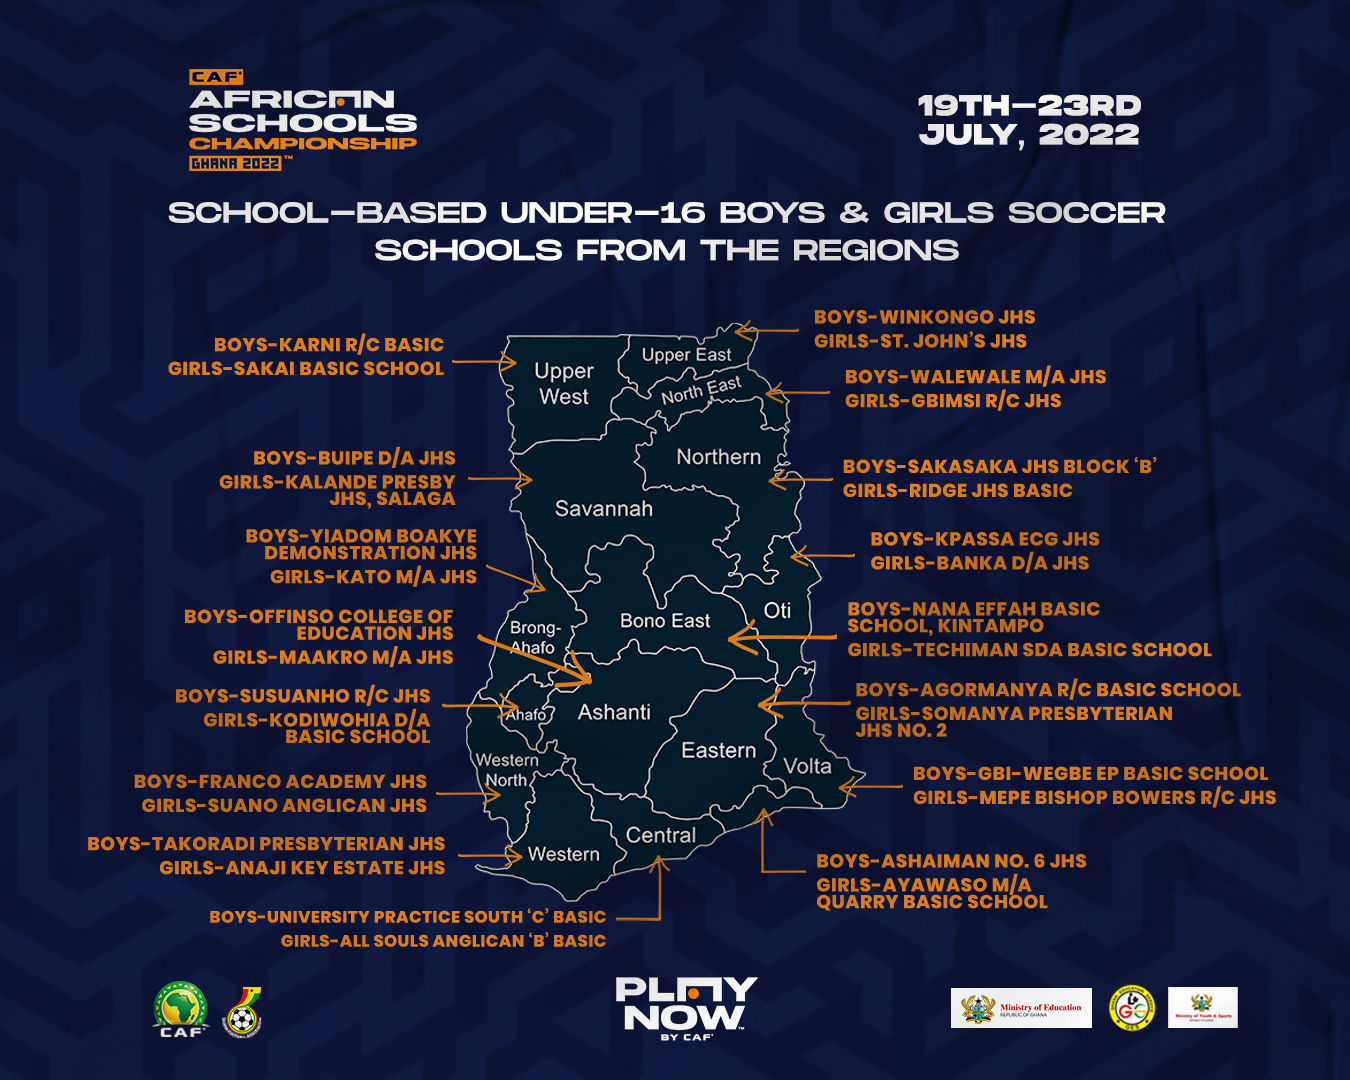 Groups for the CAF U-16 School competition for boys announced